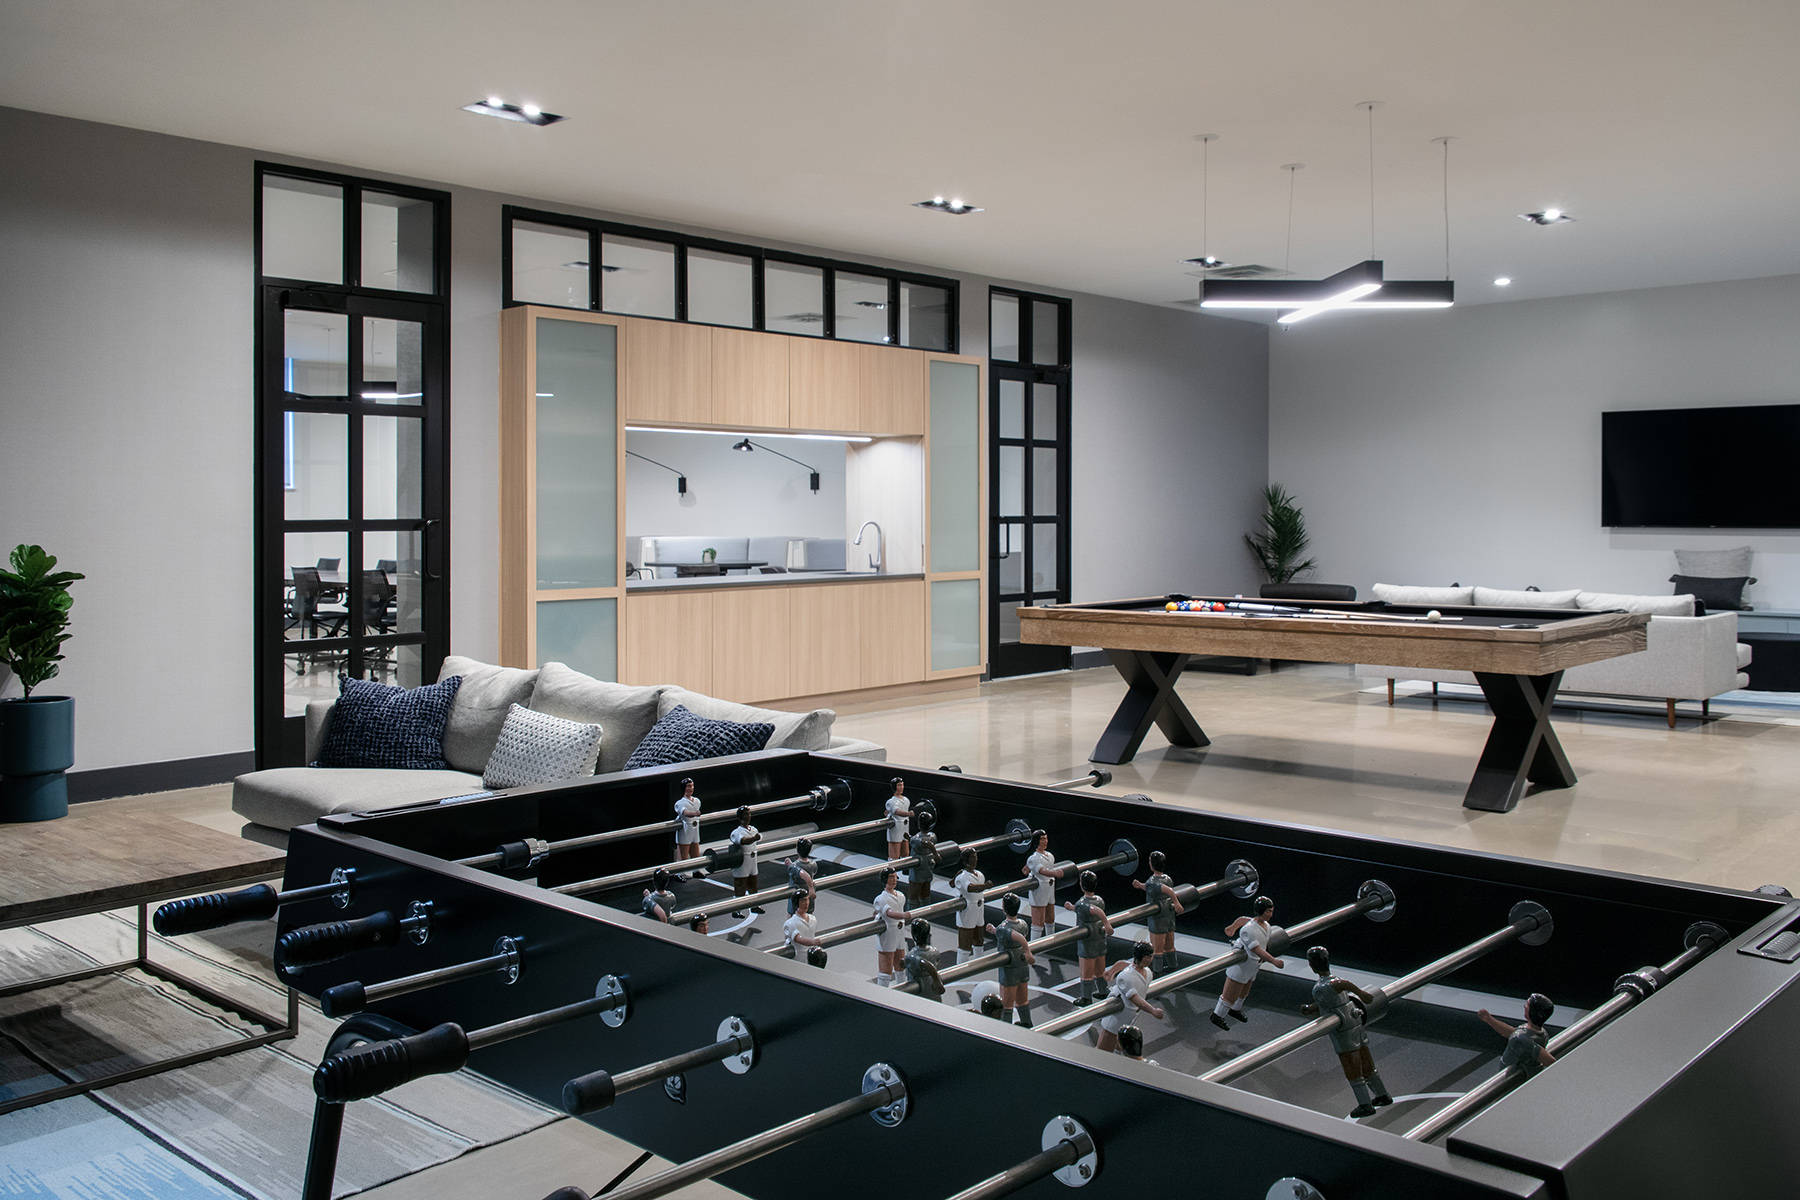 Game room with close up of foosball table with billiards talbe, couches and kitchen in the background